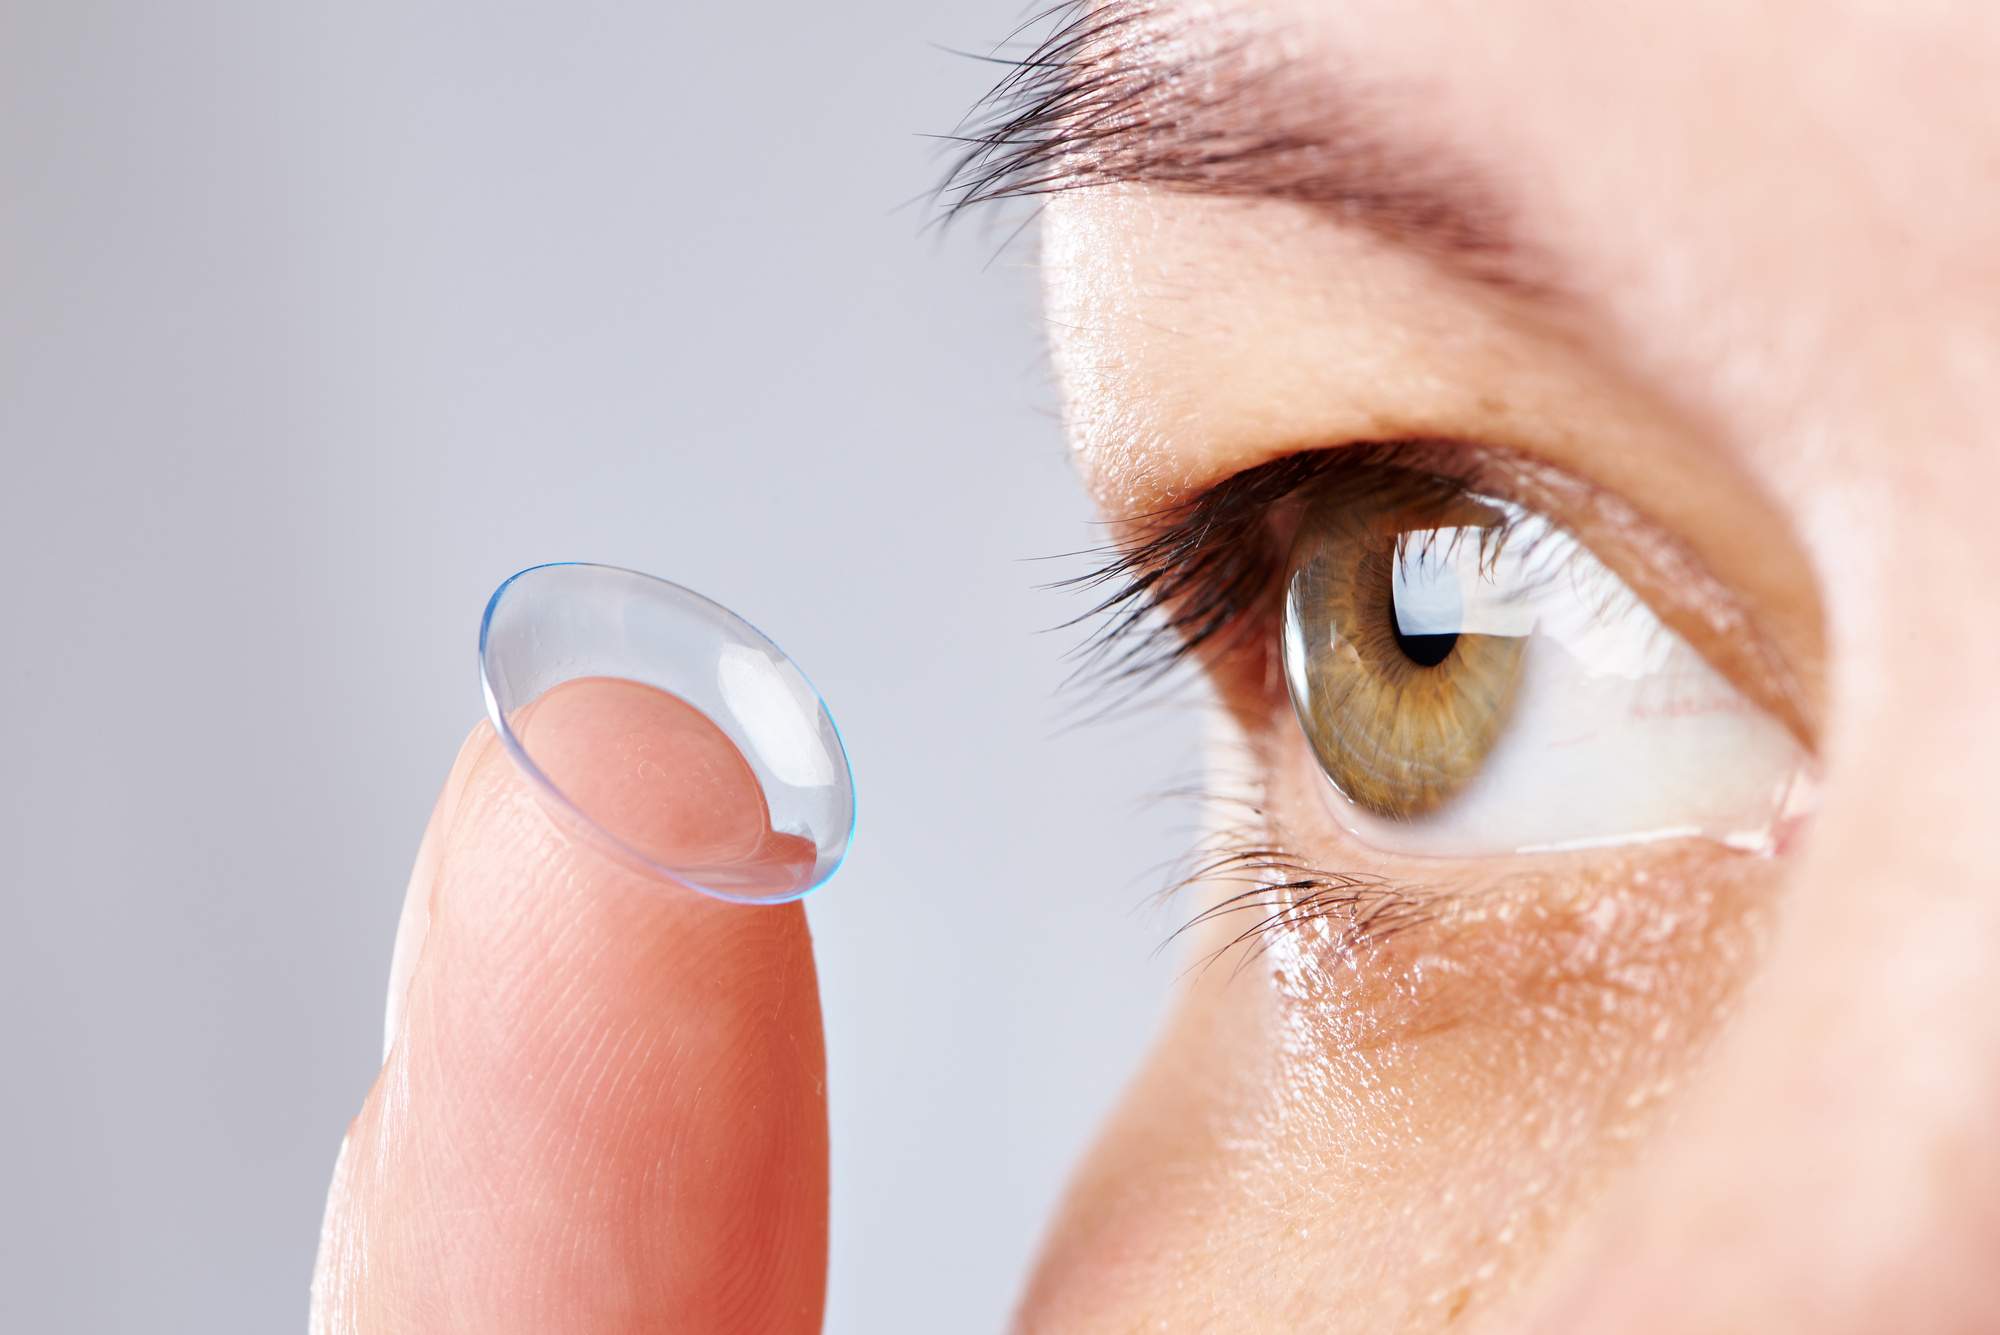 How Long Can You Wear Contacts Safely?